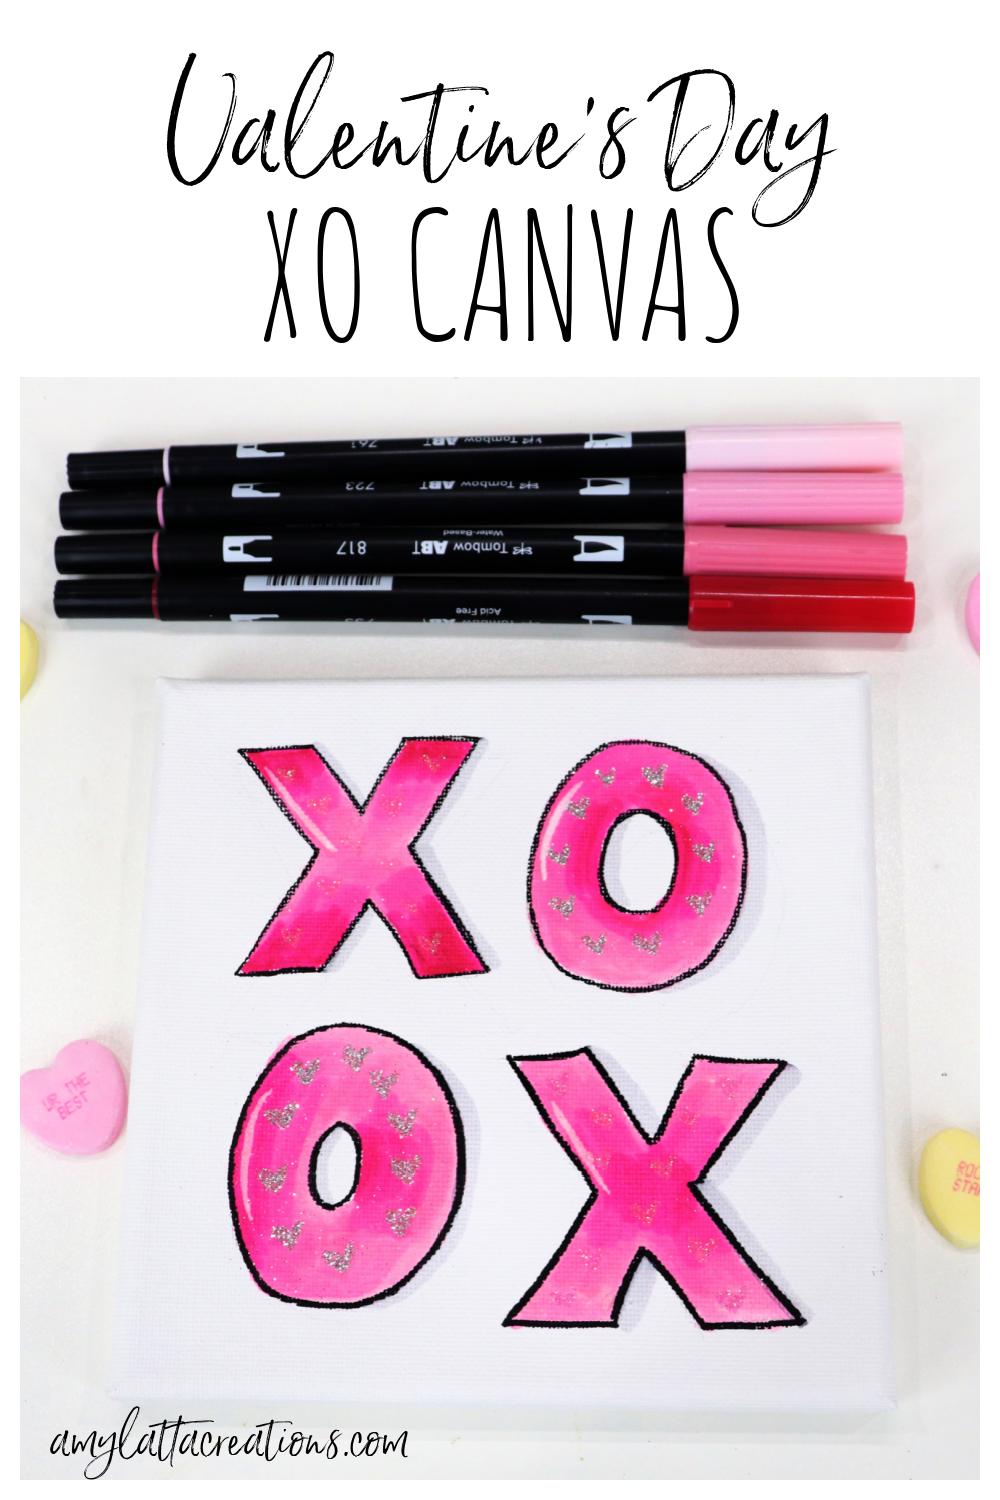 Image contains a square canvas with pink "xo" letters and four markers.